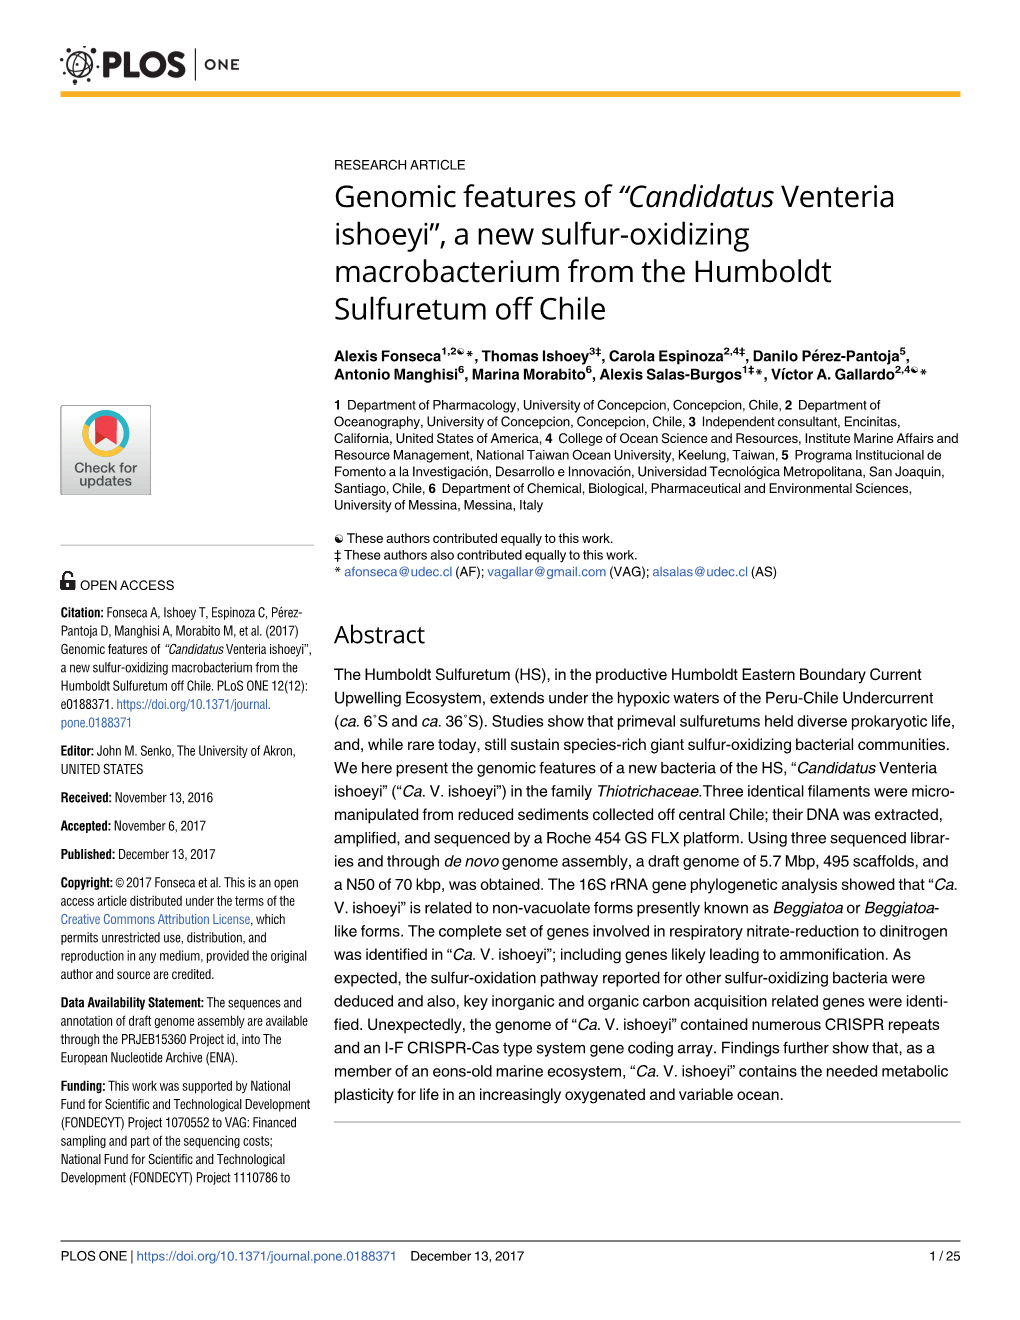 Genomic Features of “Candidatus Venteria Ishoeyi”, a New Sulfur-Oxidizing Macrobacterium from the Humboldt Sulfuretum Off Chile